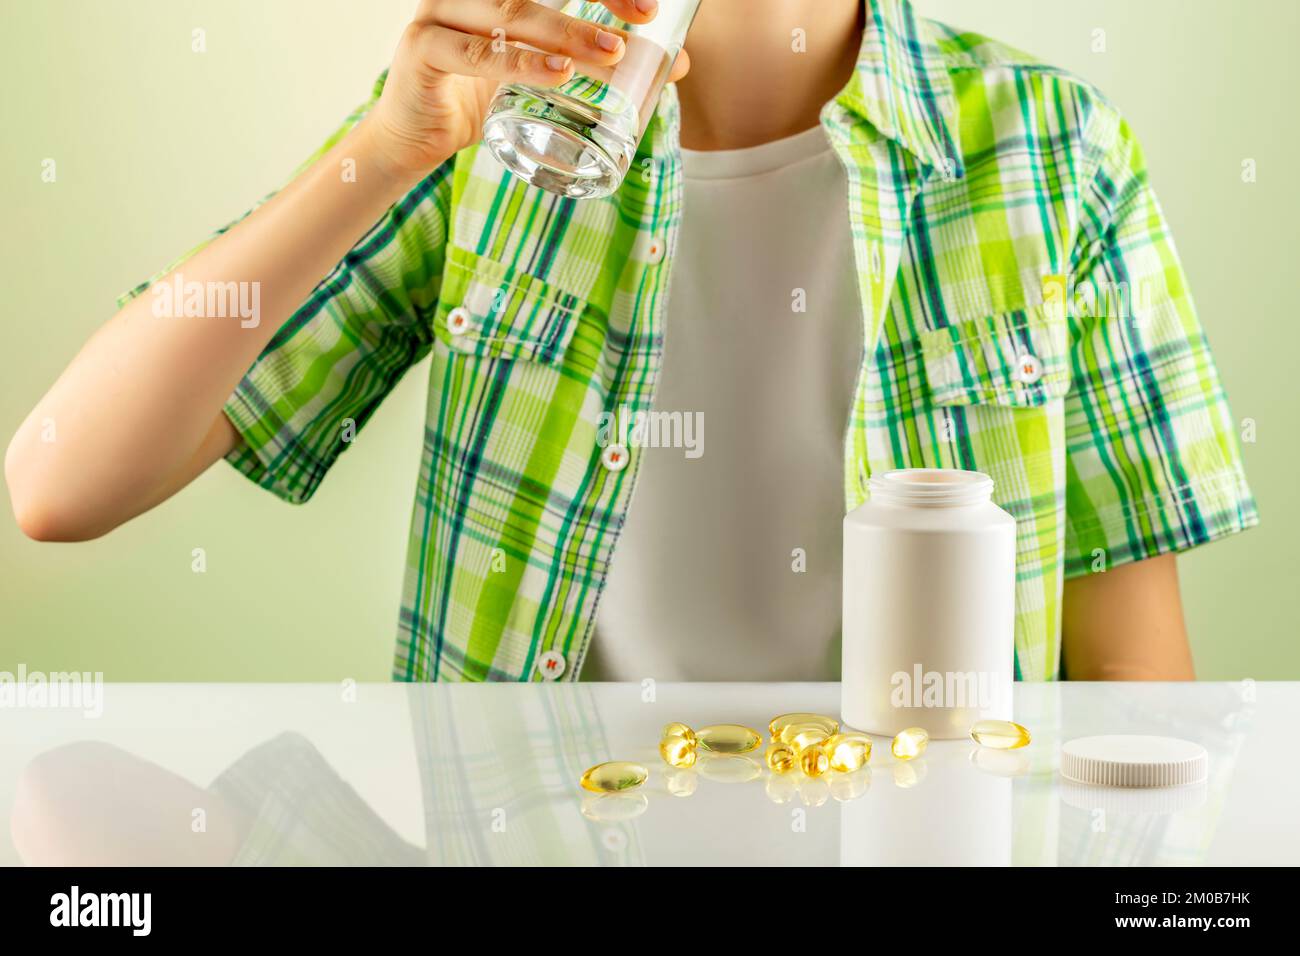 Organic kids vitamins and nutrients. Mockup of natural bio pills, vitamins or supplements. The boy washes down vitamins in gel capsules with water. Su Stock Photo